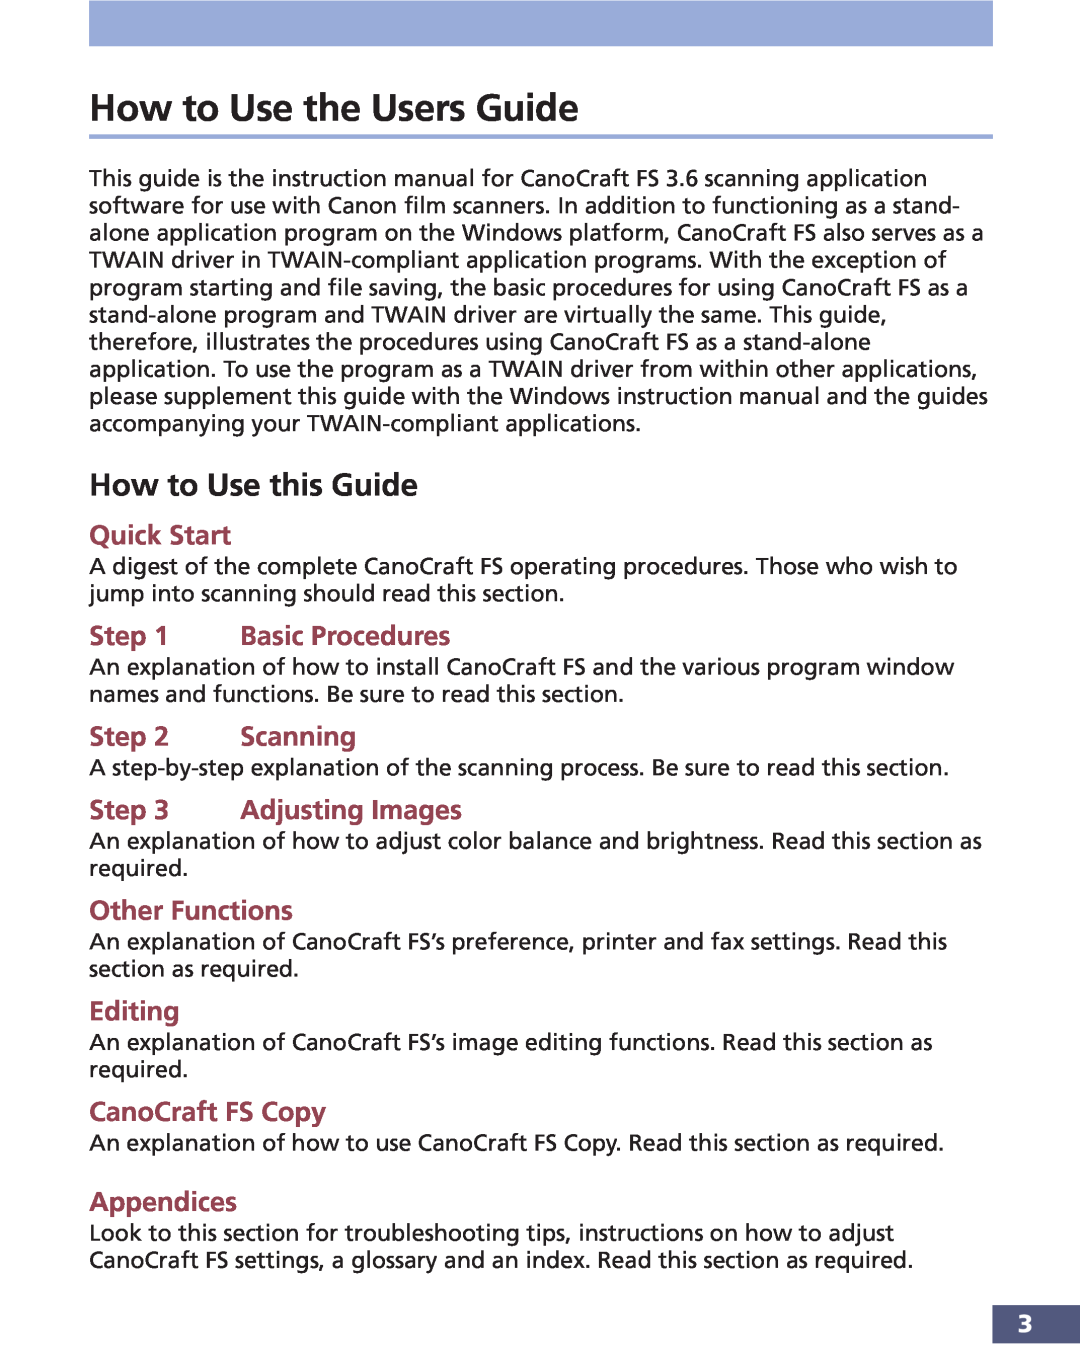 Canon FS 3.6 How to Use the Users Guide, How to Use this Guide, Quick Start, Basic Procedures, Step, Scanning, Editing 